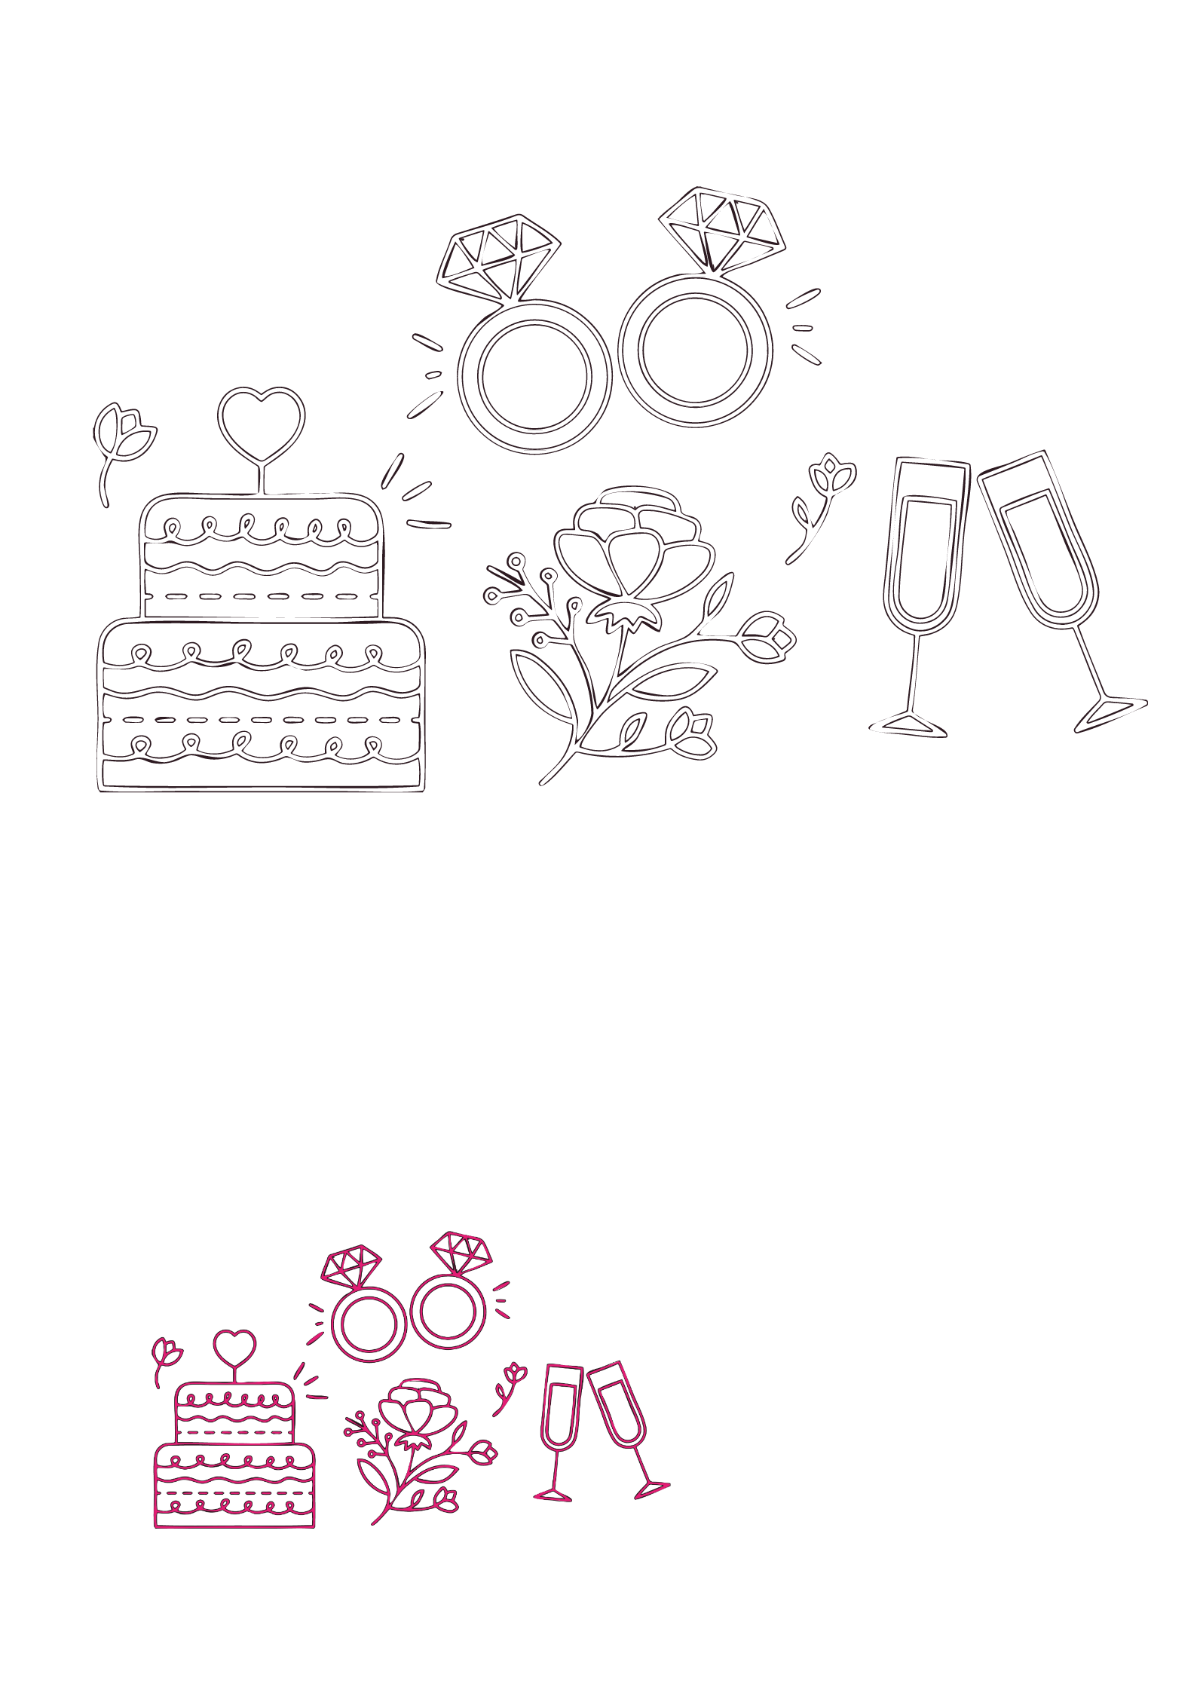 Free Wedding Doodle Coloring Page Template